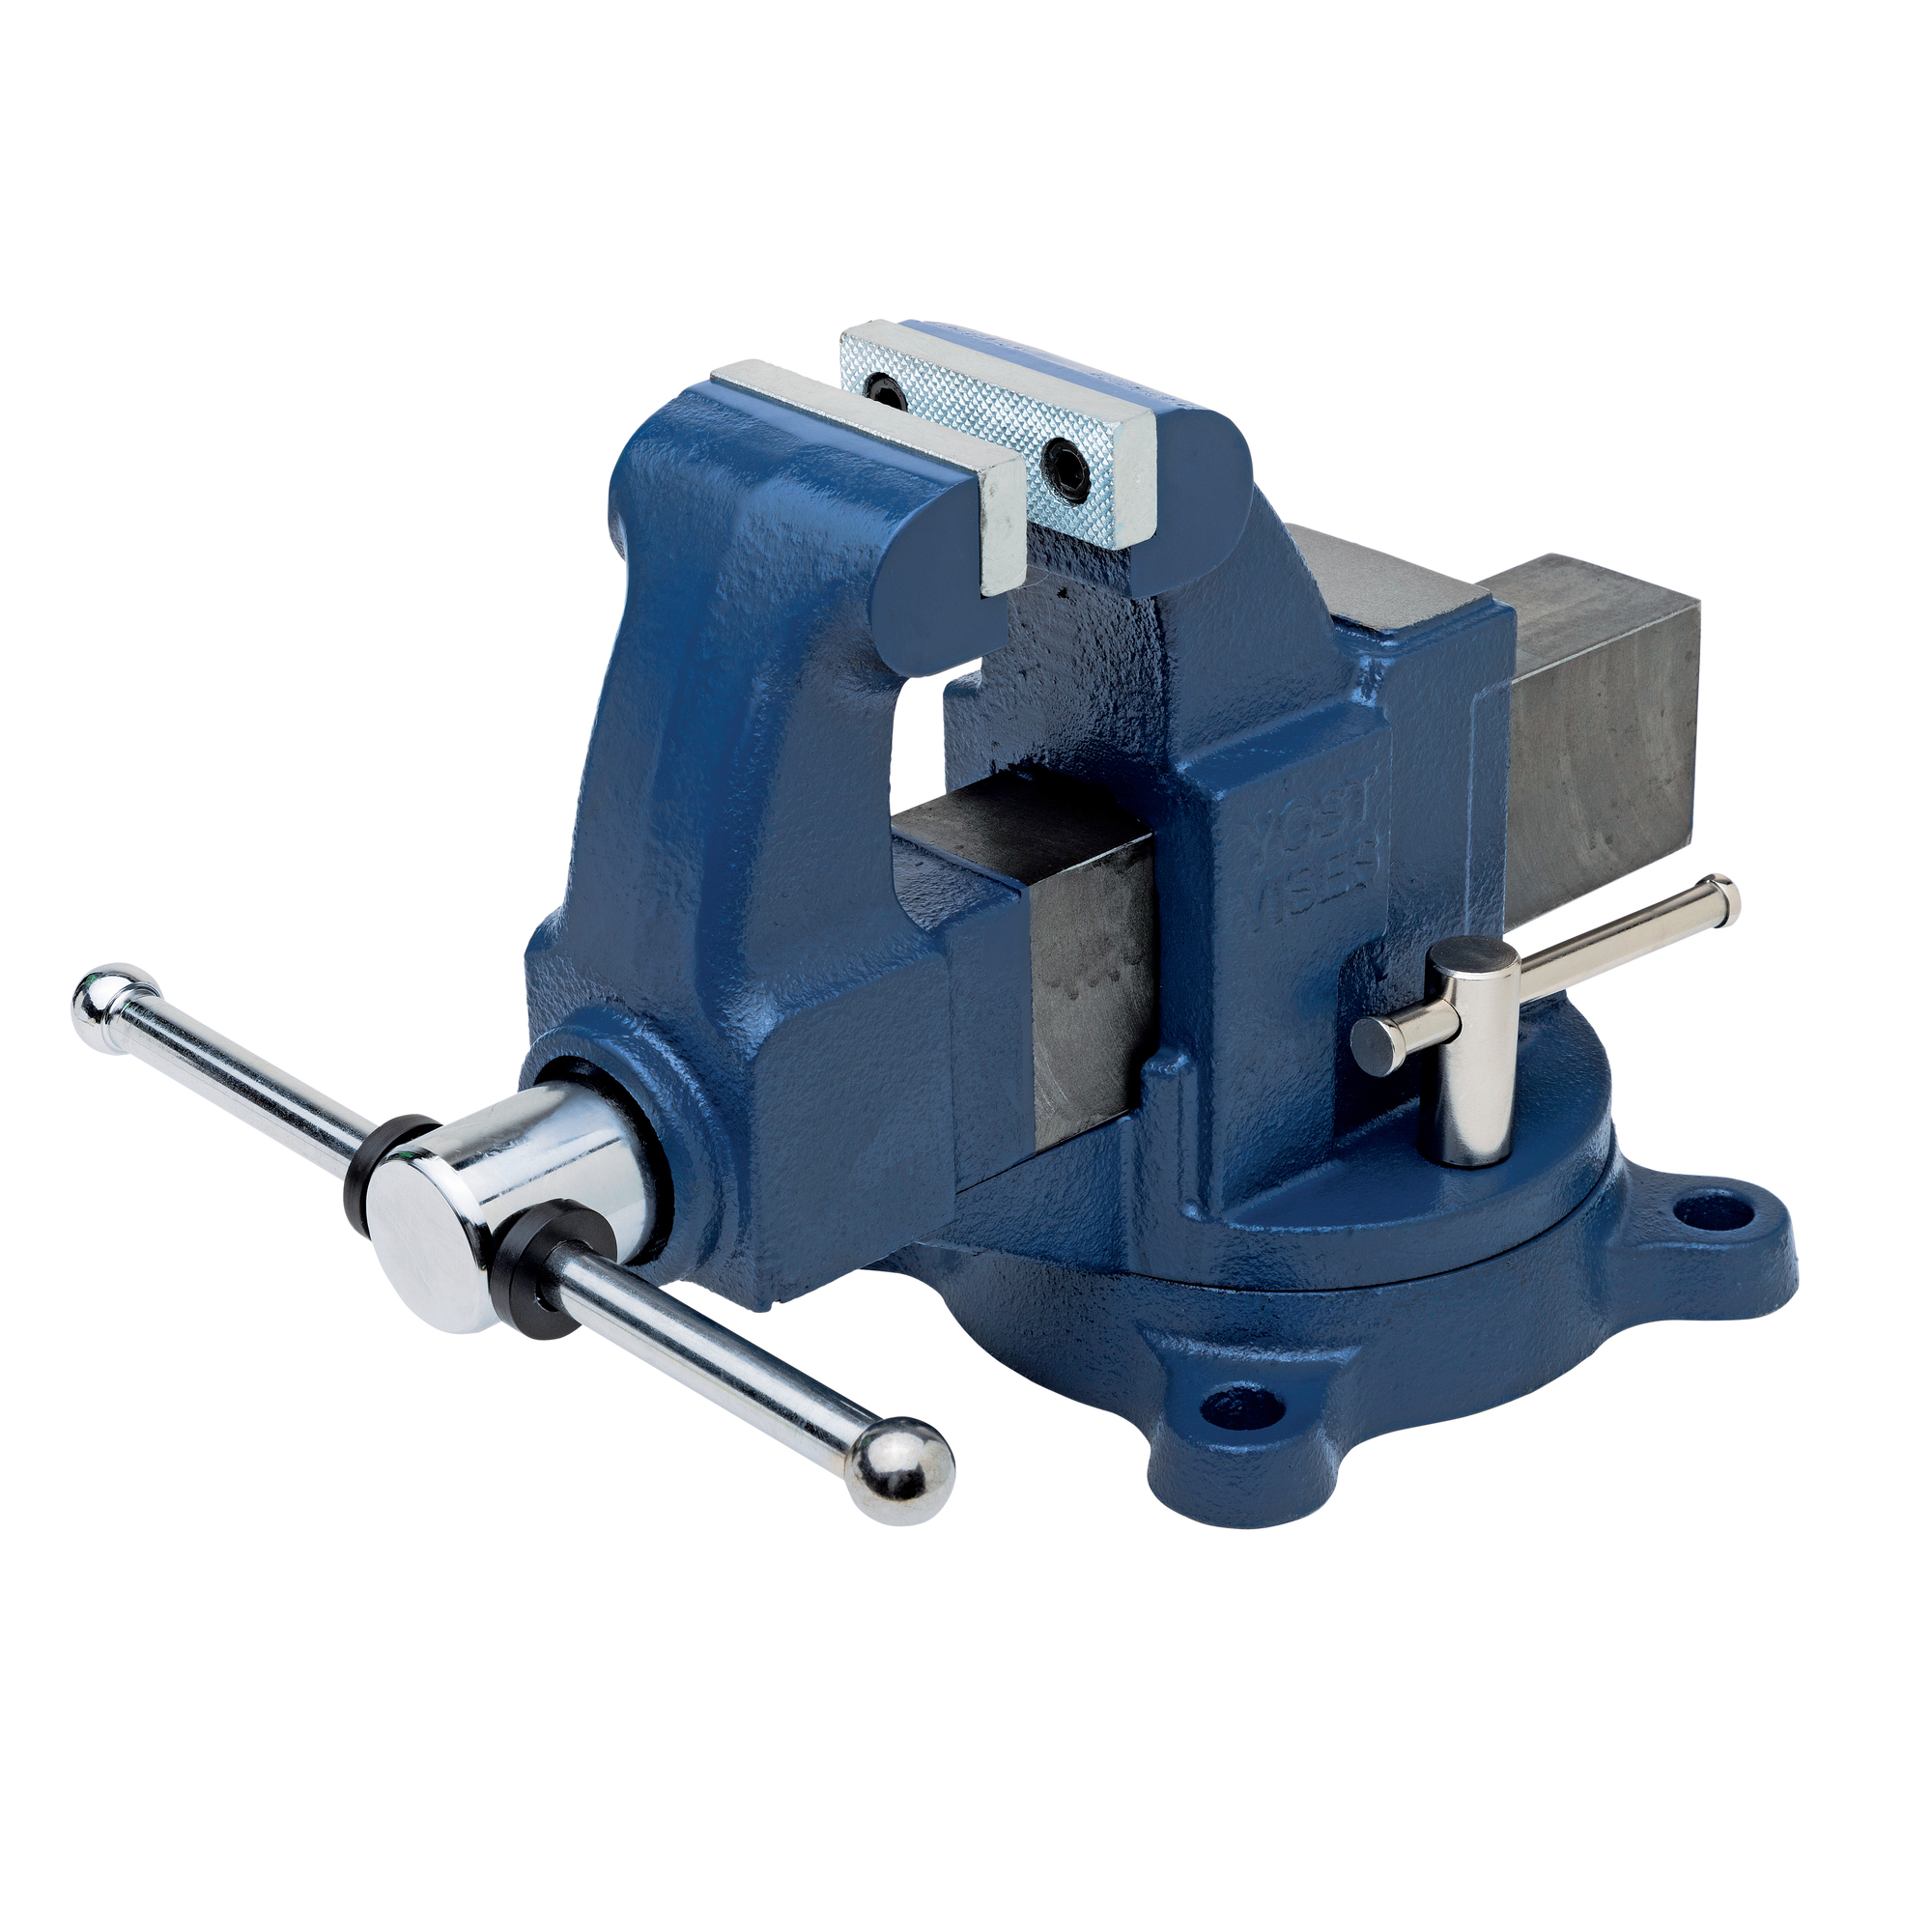 Yost Vises, 3Inch HD Vise Swivel Base, Jaw Width 3 in, Jaw Capacity 4 in, Material Ductile Iron, Model 203